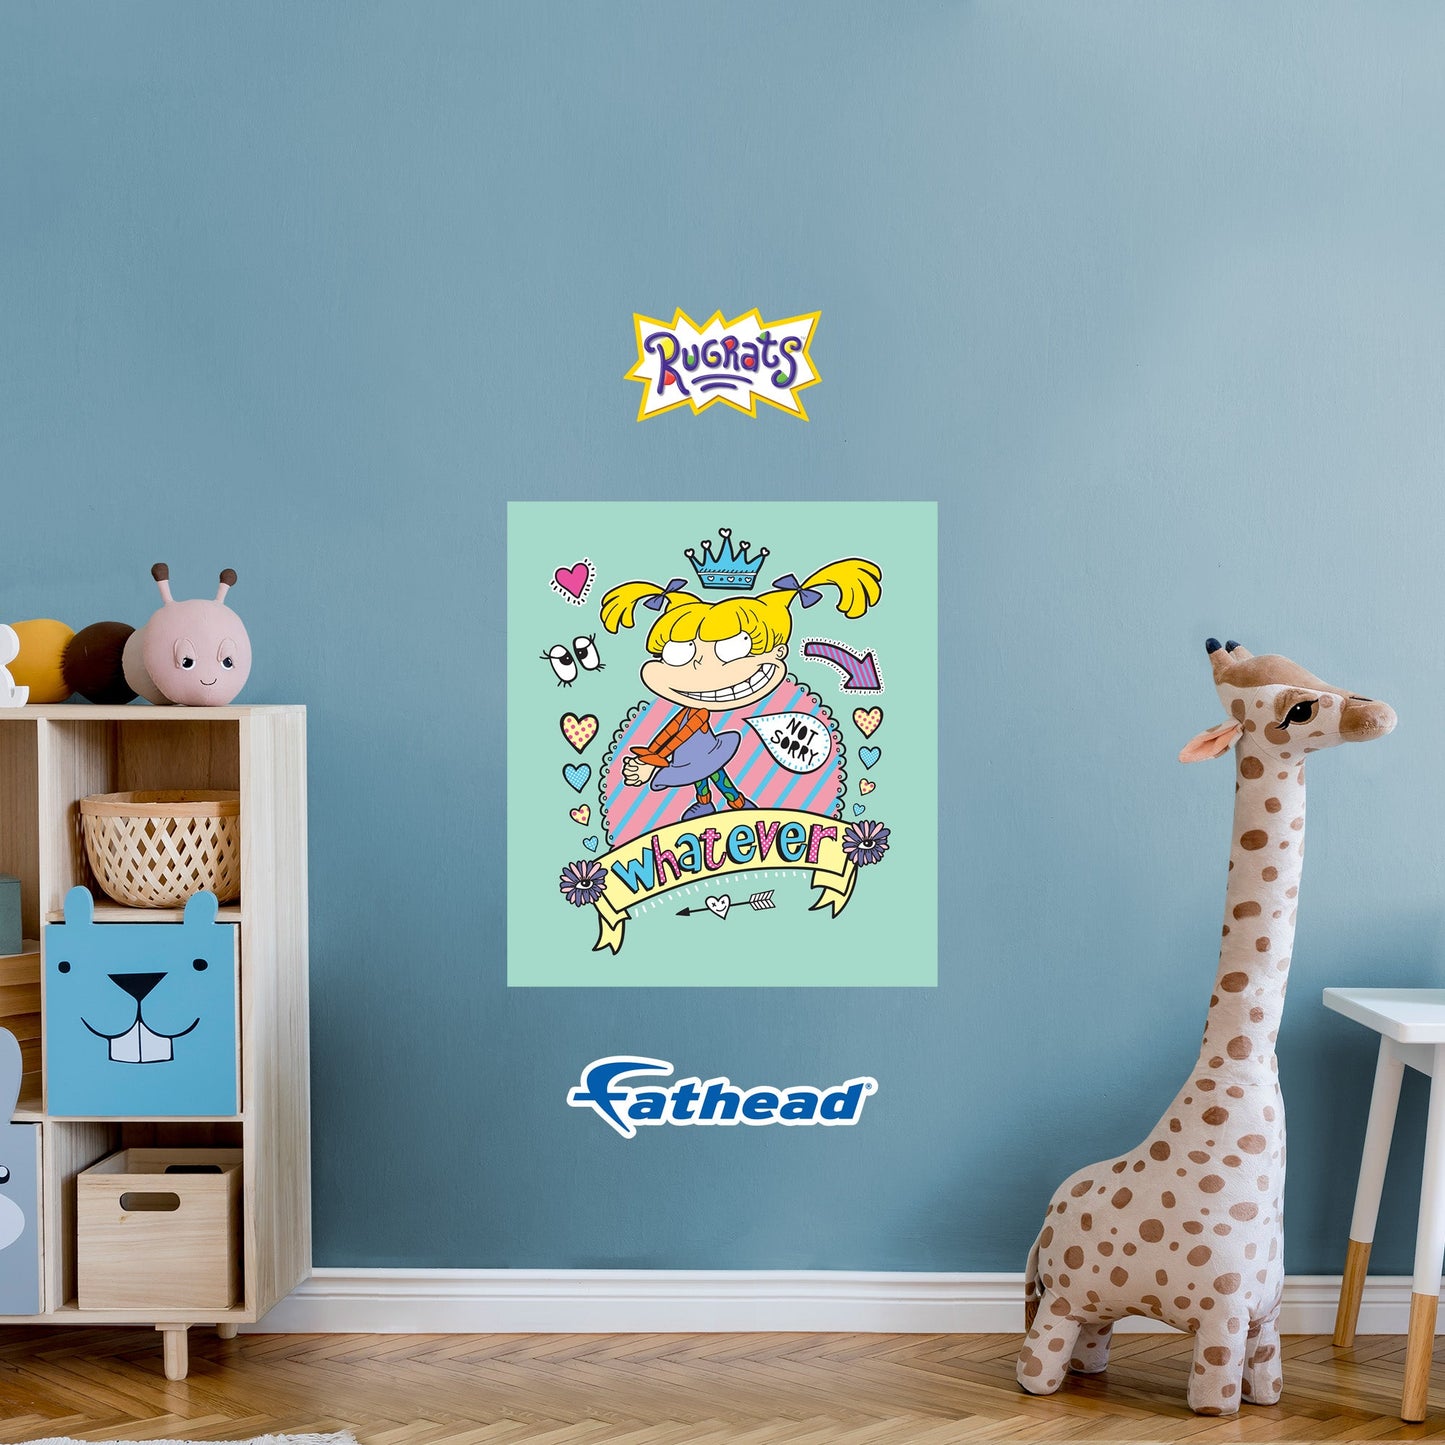 Rugrats: Whatever Poster - Officially Licensed Nickelodeon Removable Adhesive Decal